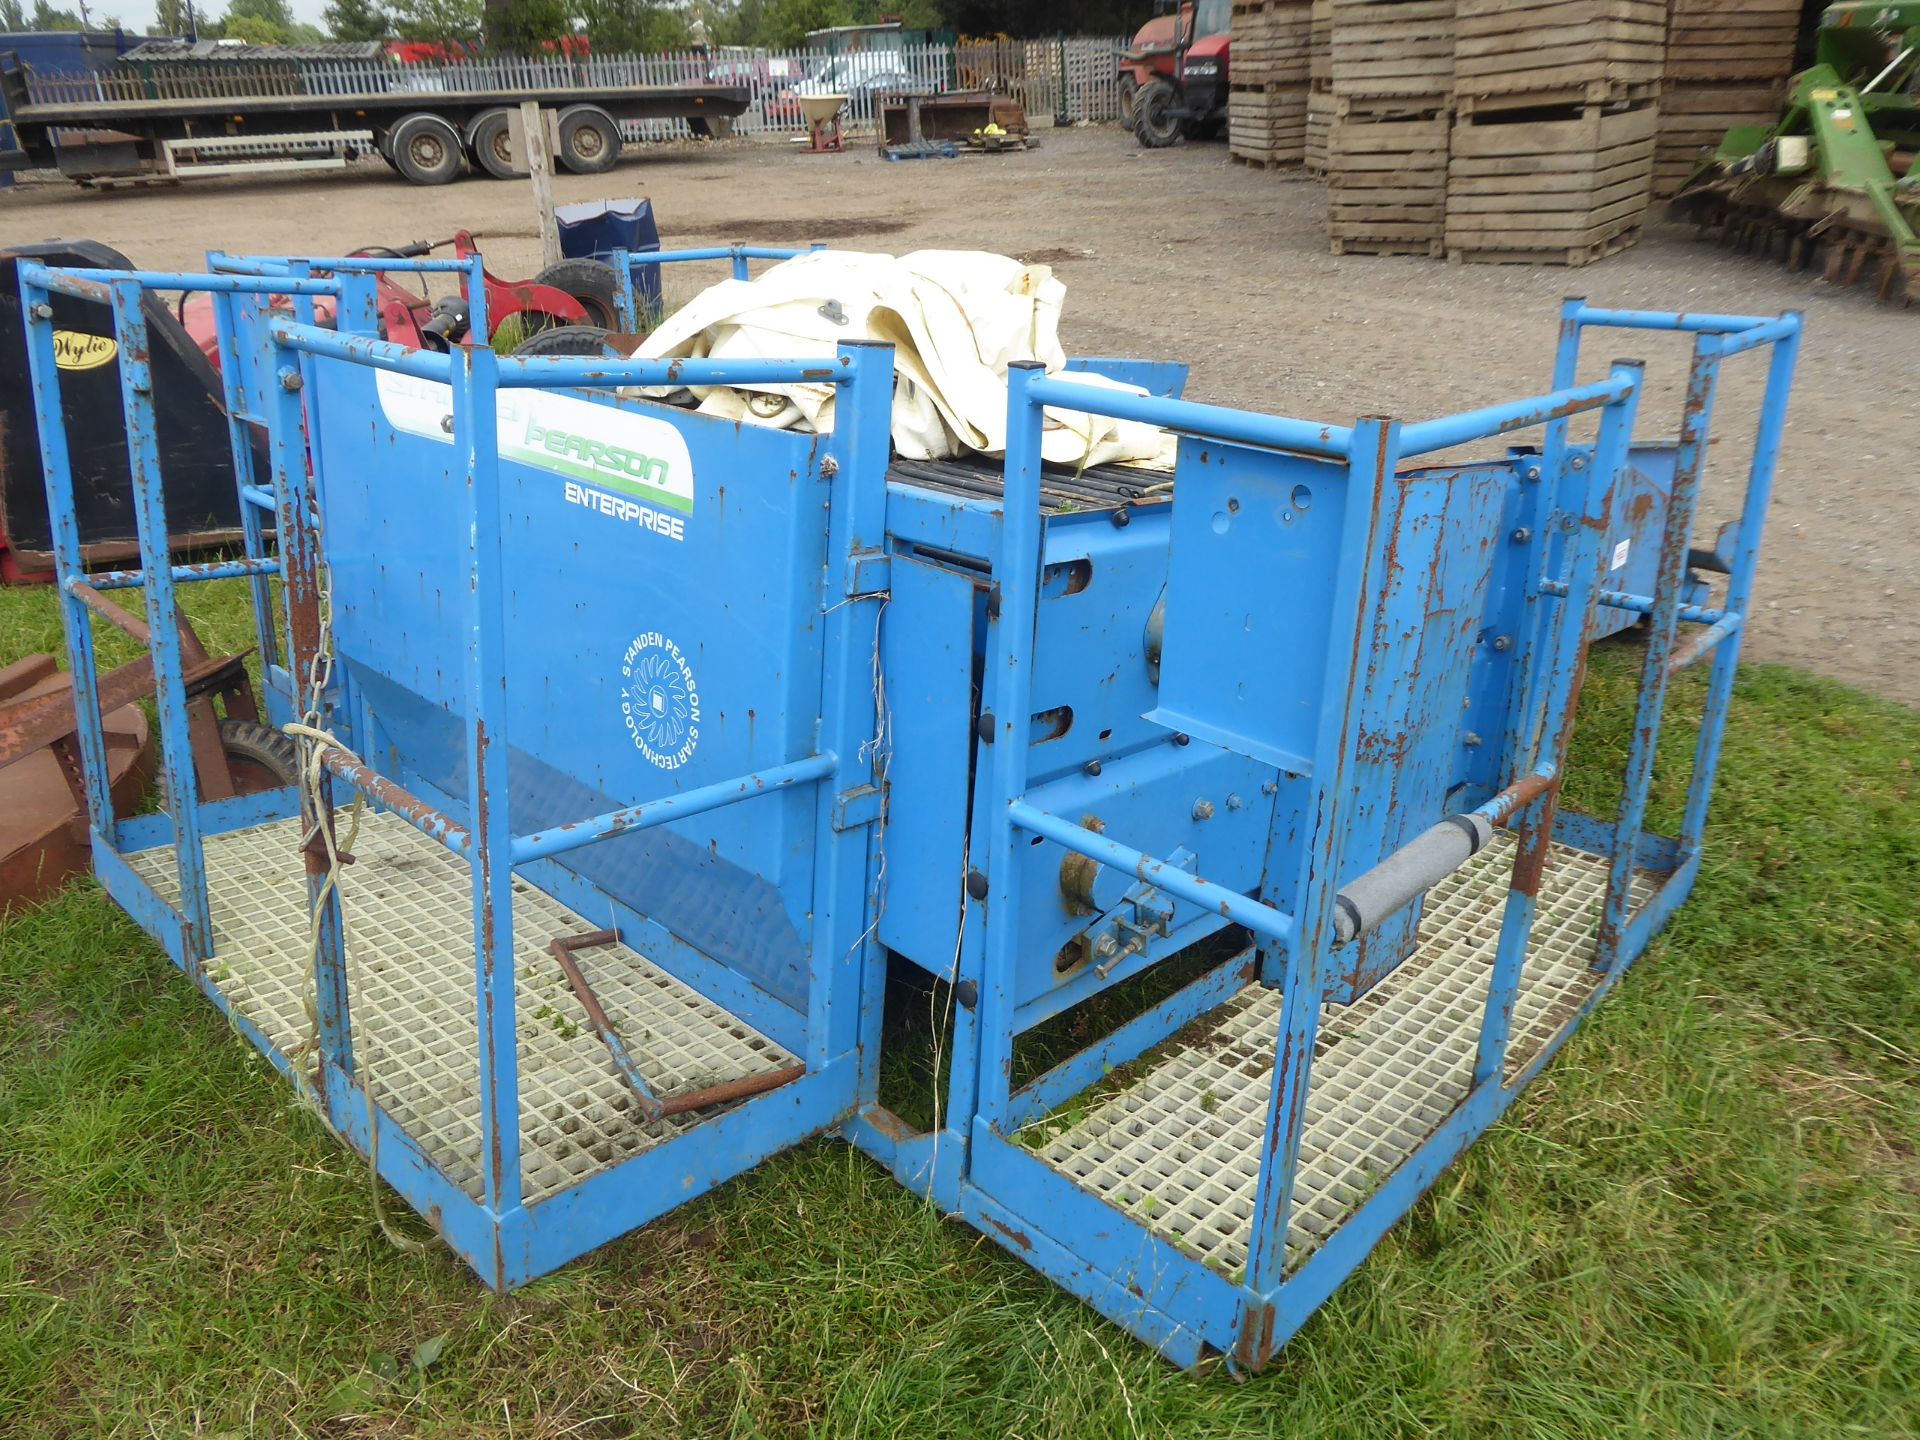 6 man picking off table & canopy, 2009, to fit a Standen Pearson Enterprise potato harvester